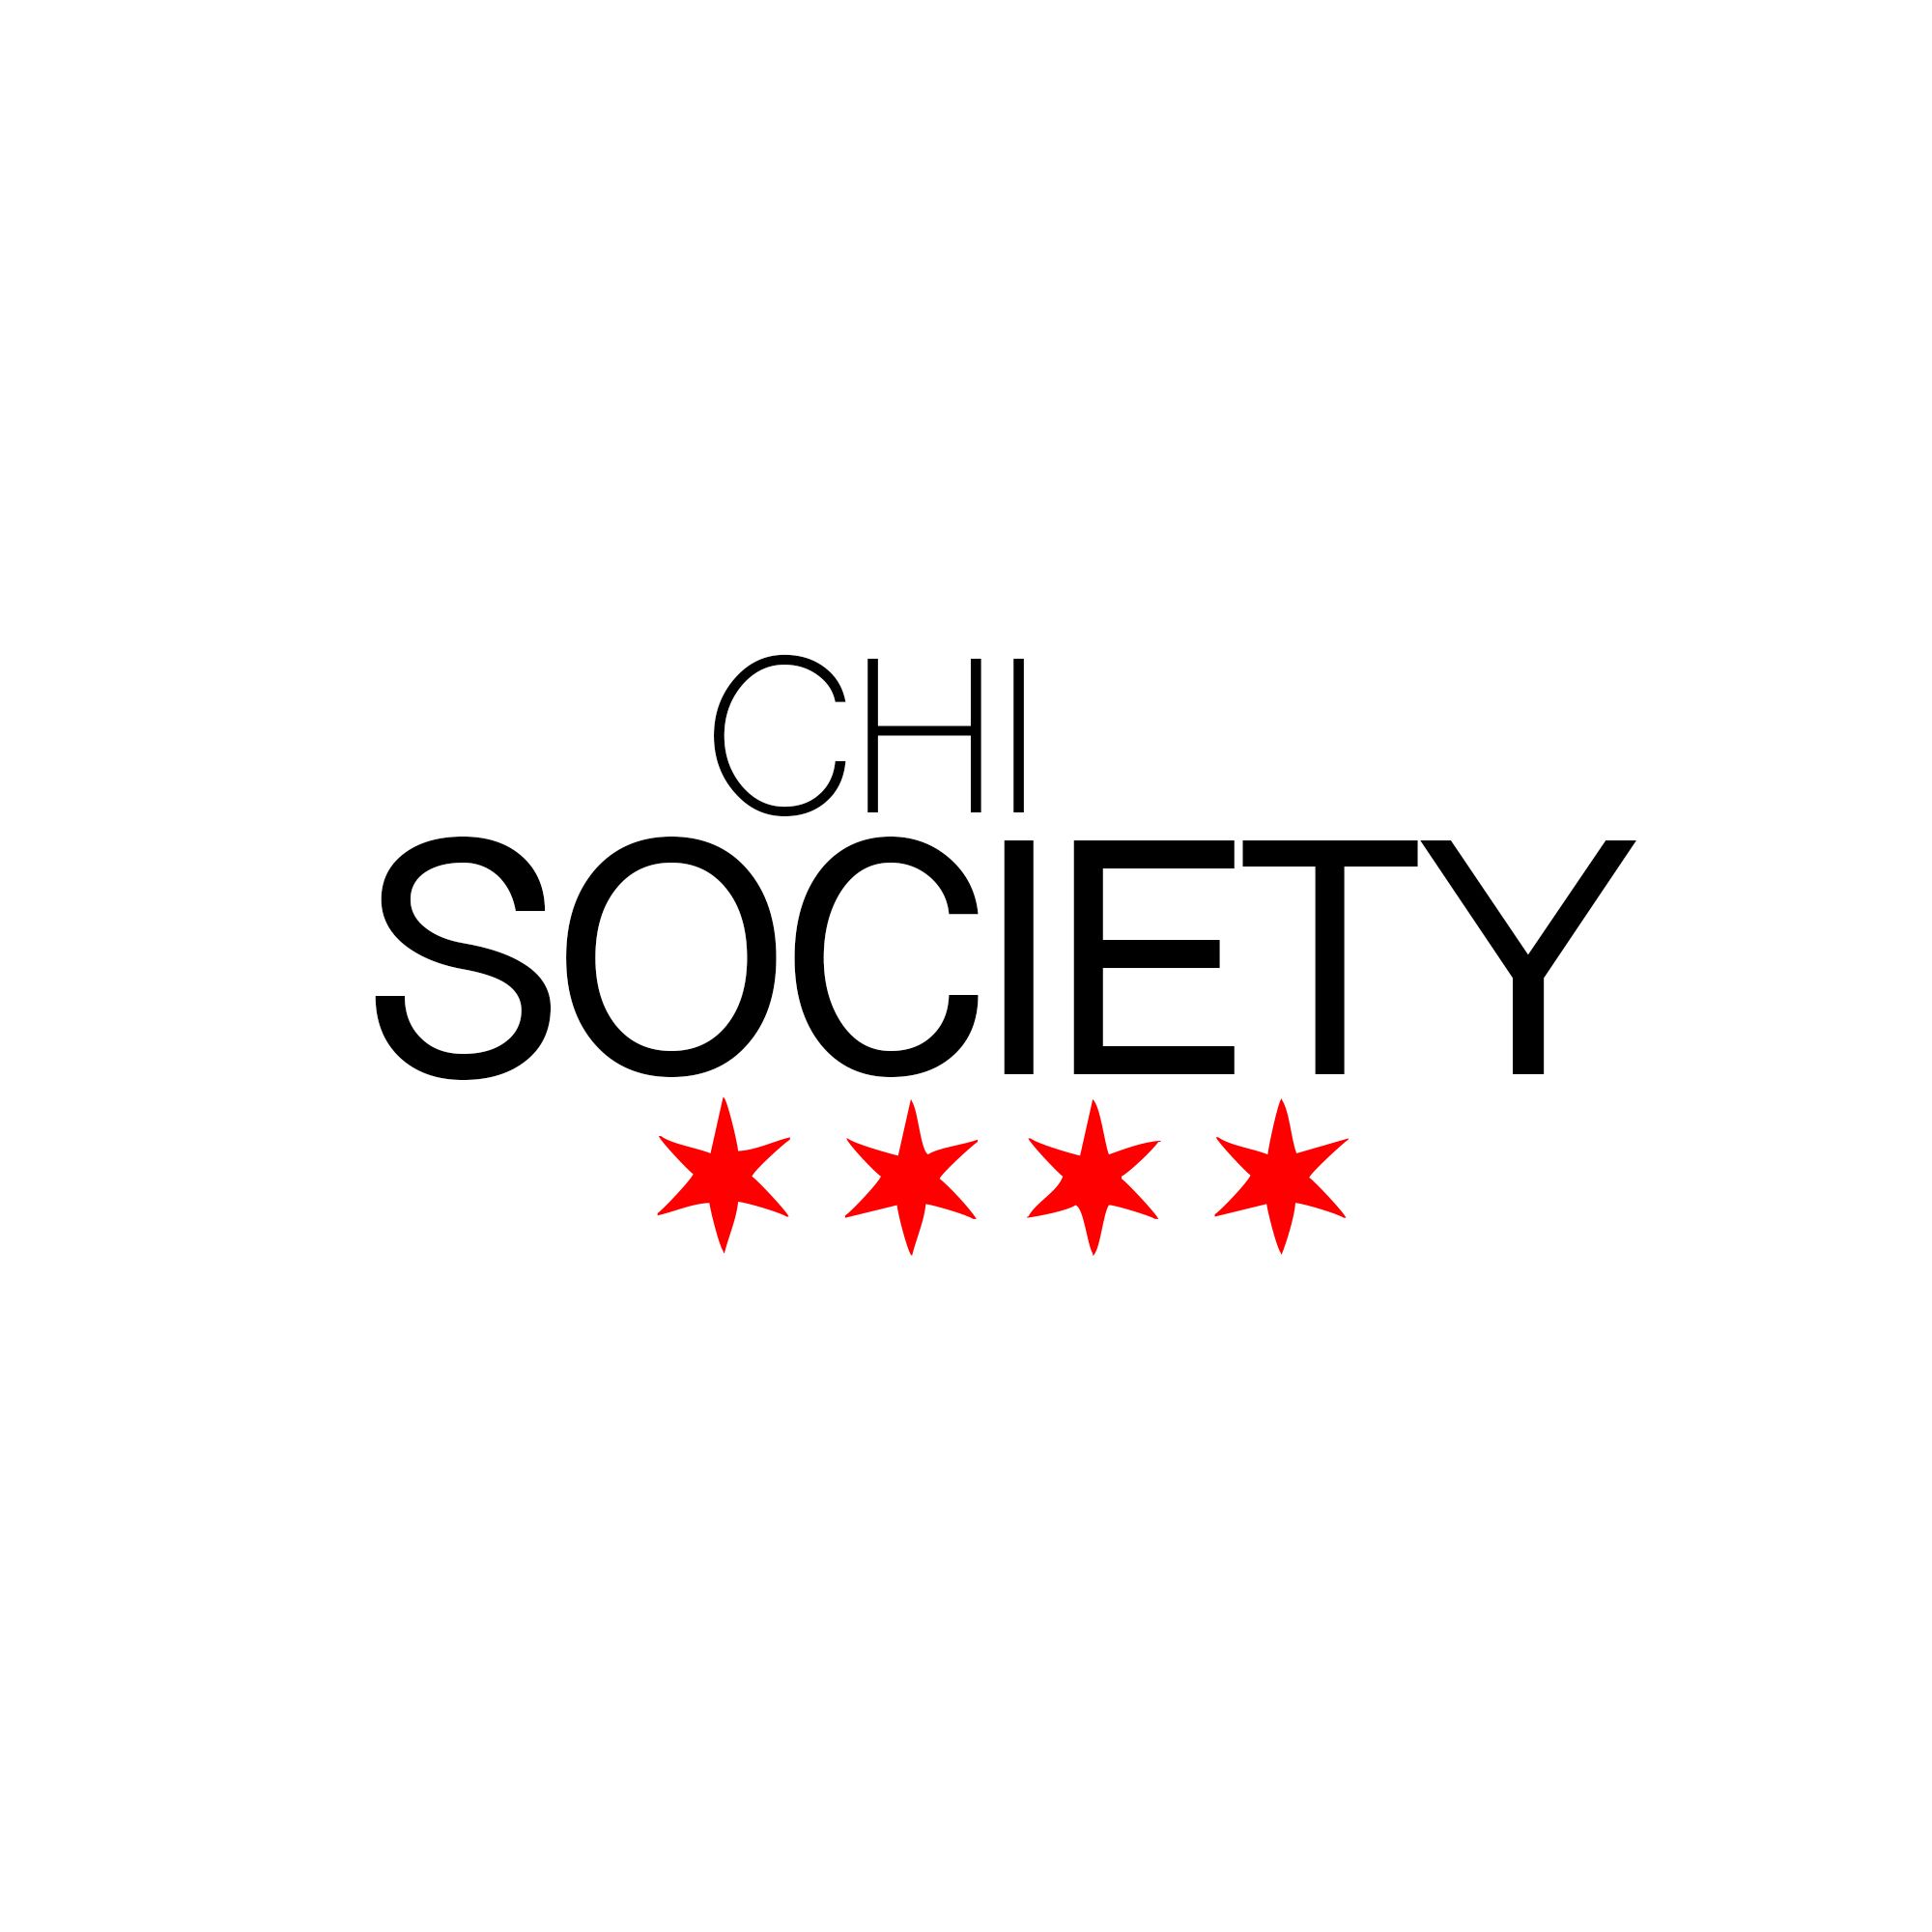 Chicago's Health & Fitness Resource - CHI-SOCIETY